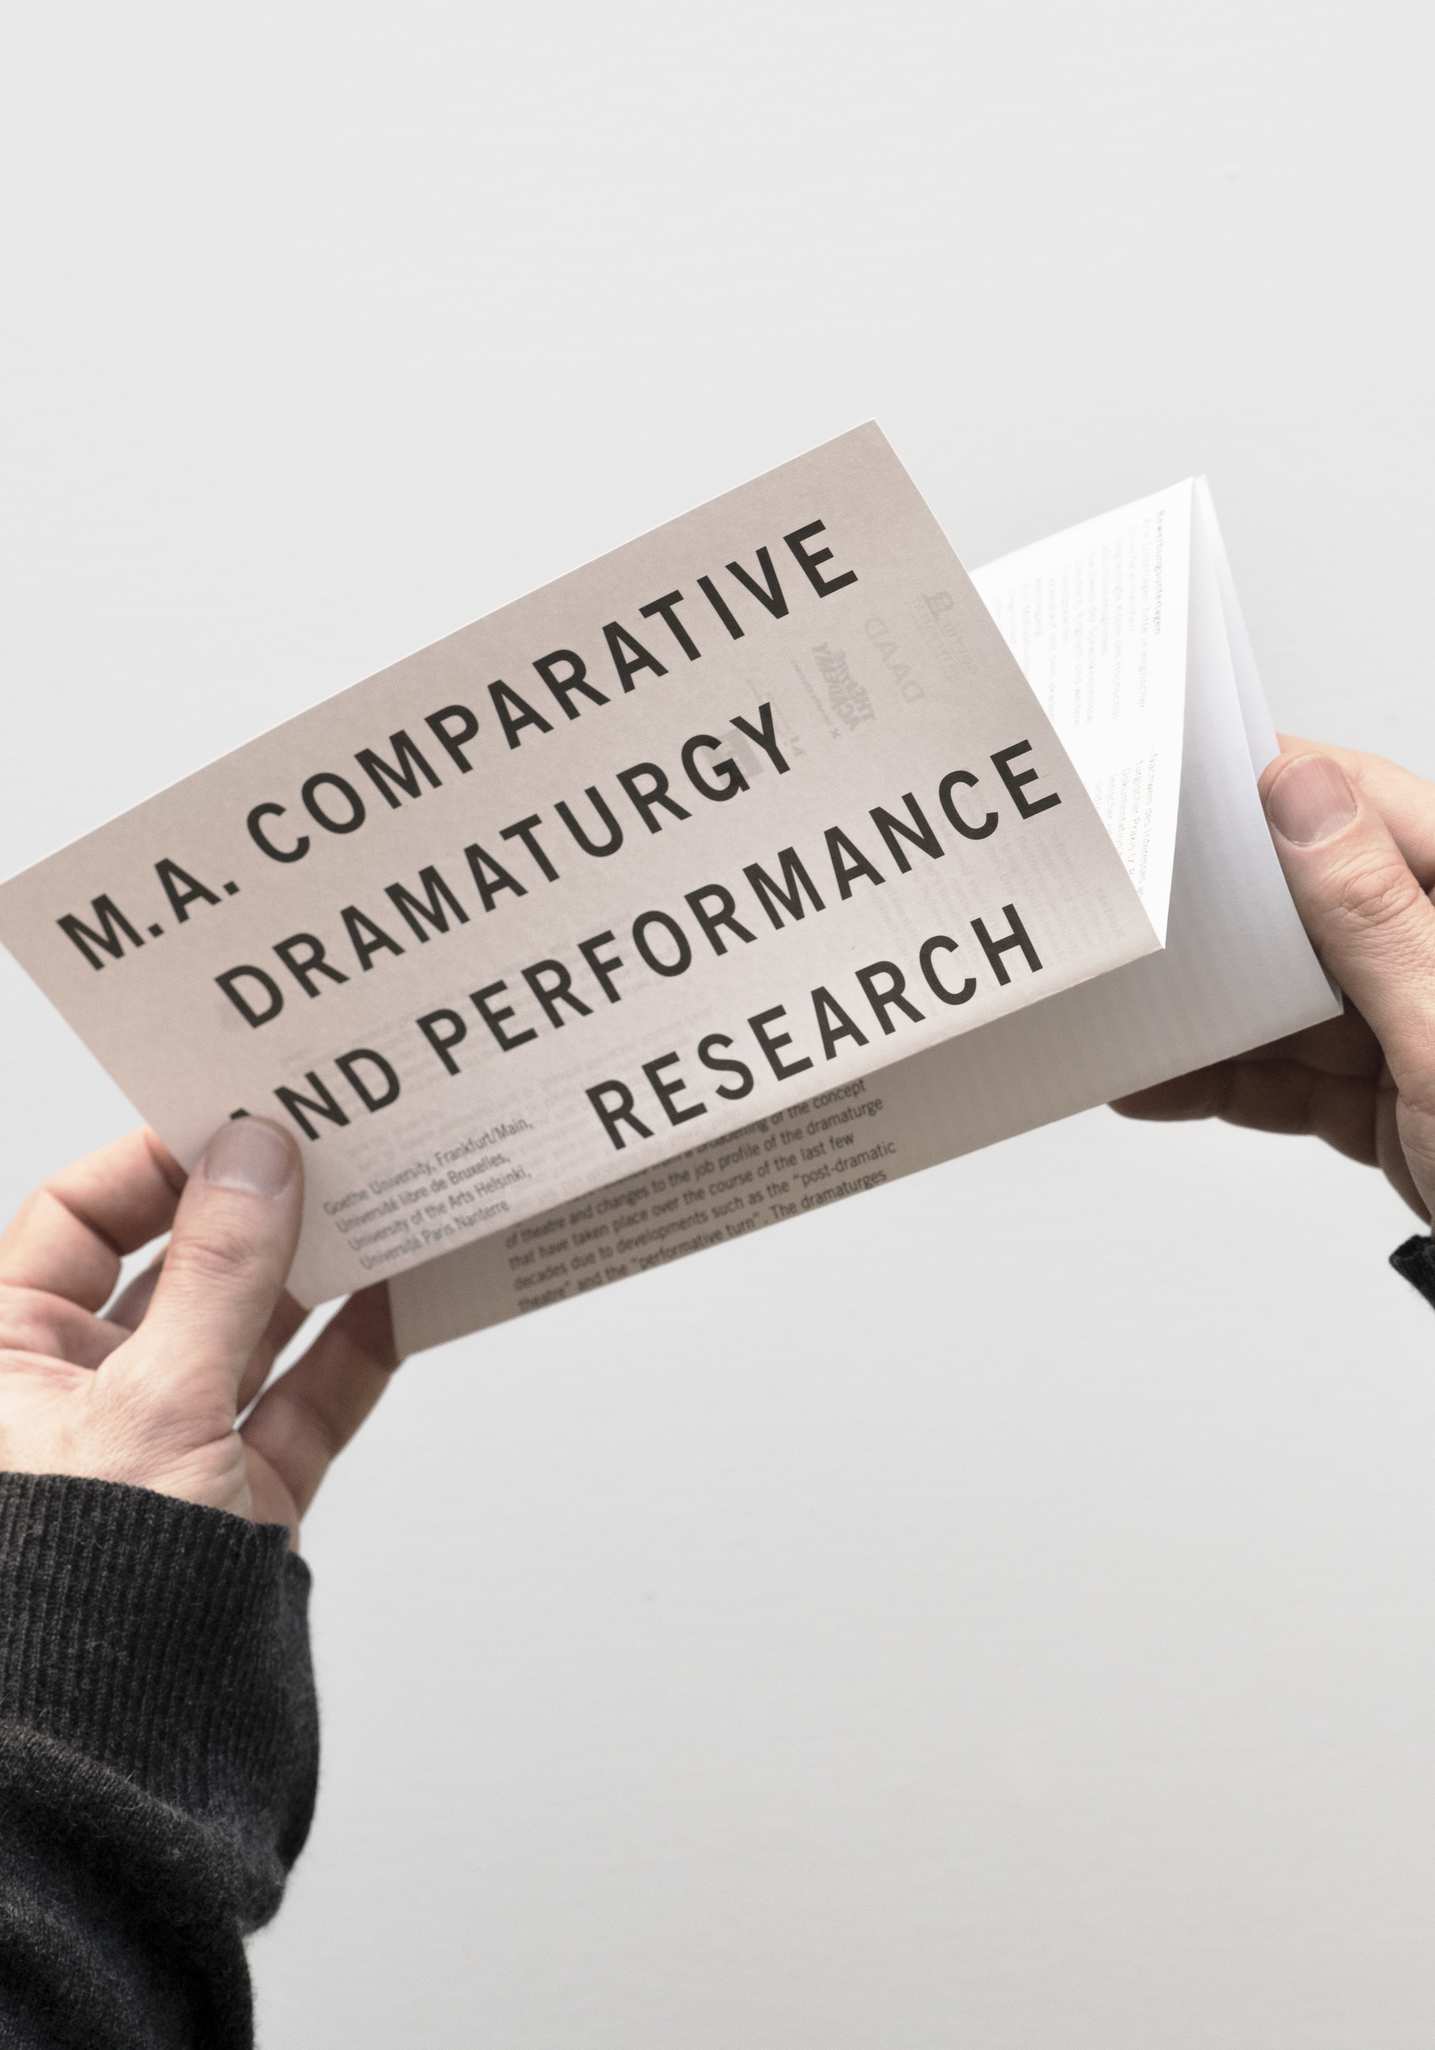 ma-comparative-dramaturgy-and-performance-research-flyer-8-1435x2050px